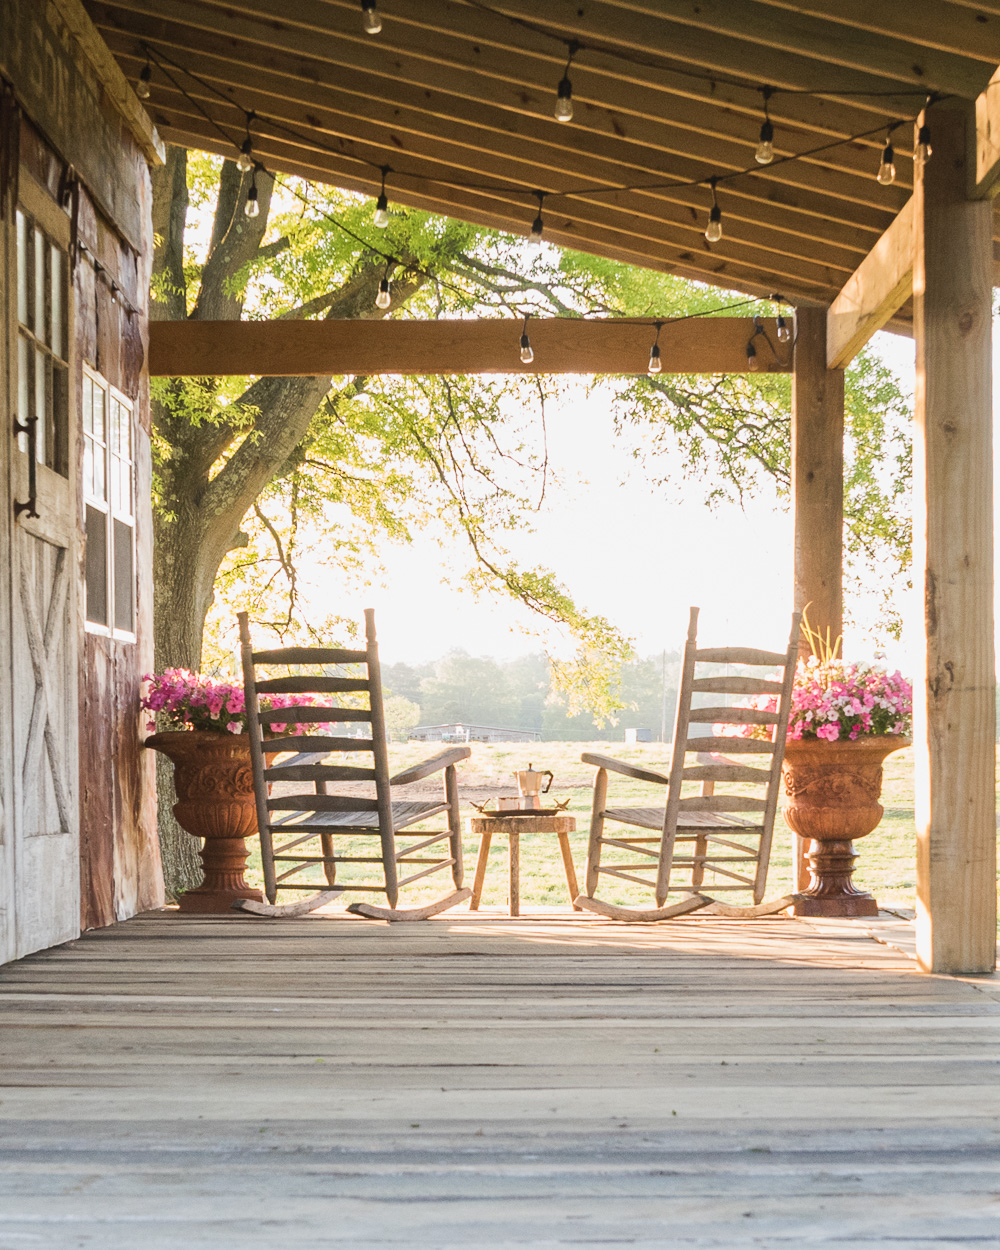 Decorating our barn porch for summer using flea market finds.